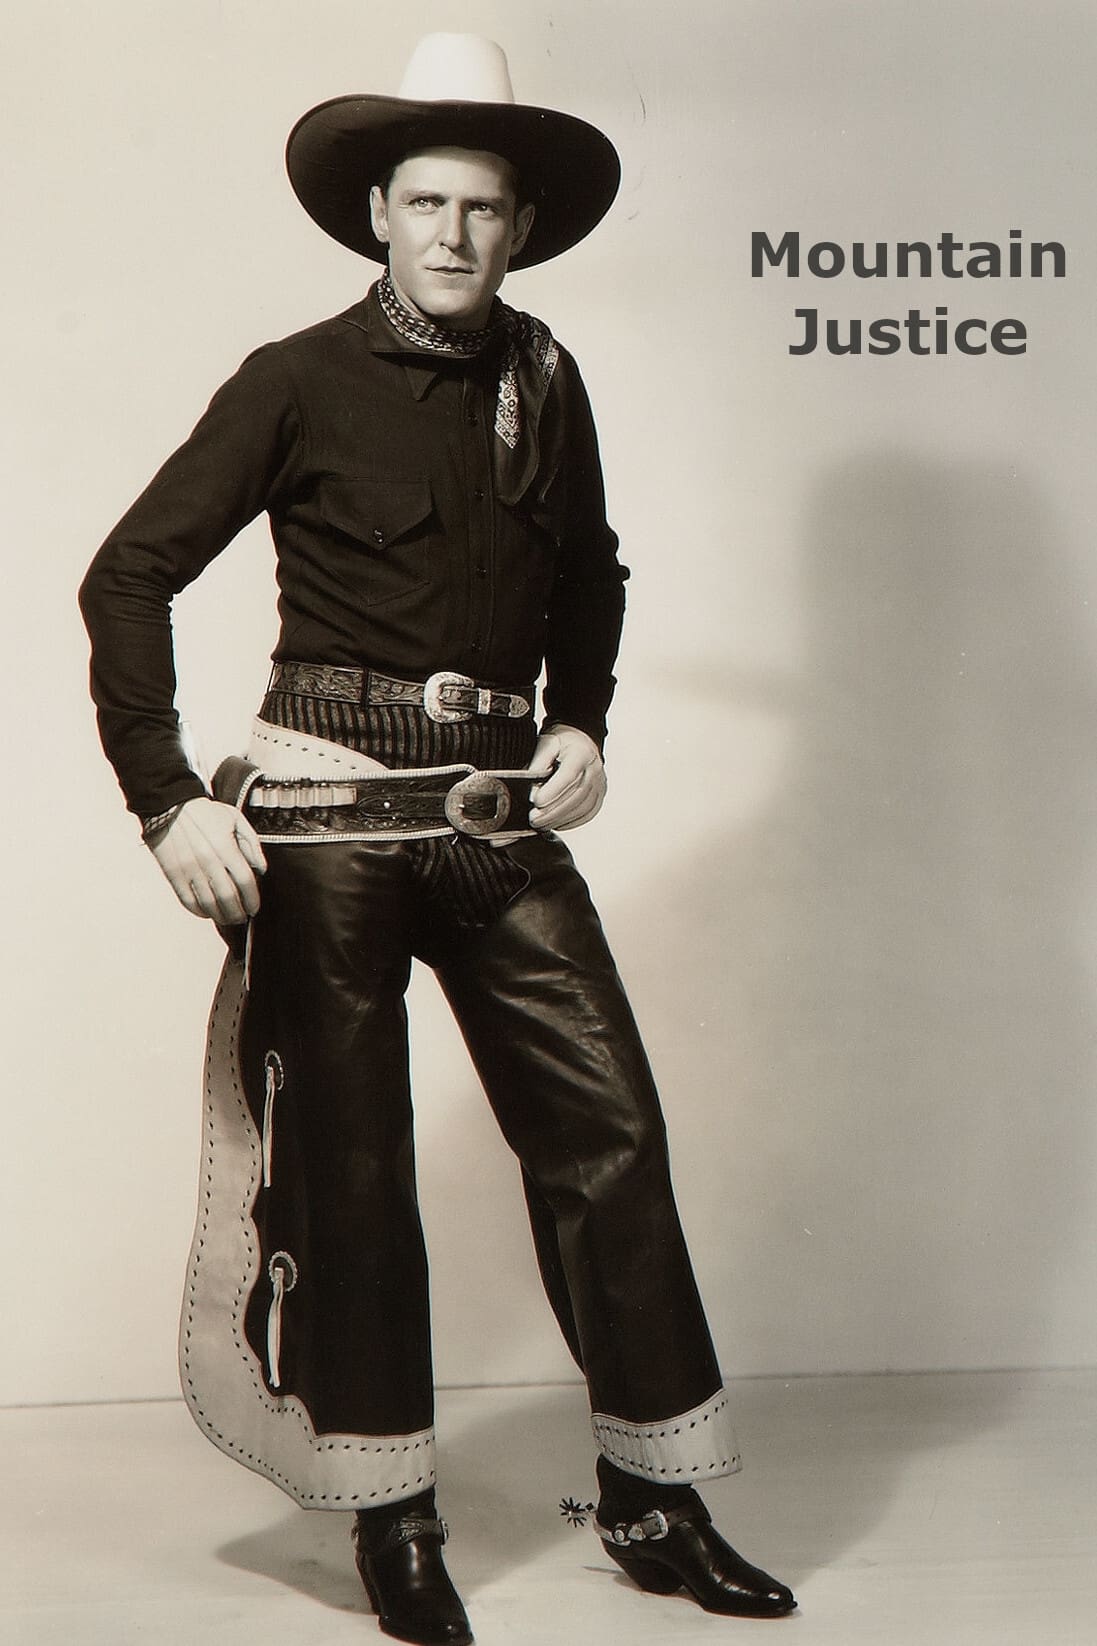 Mountain Justice (1930)